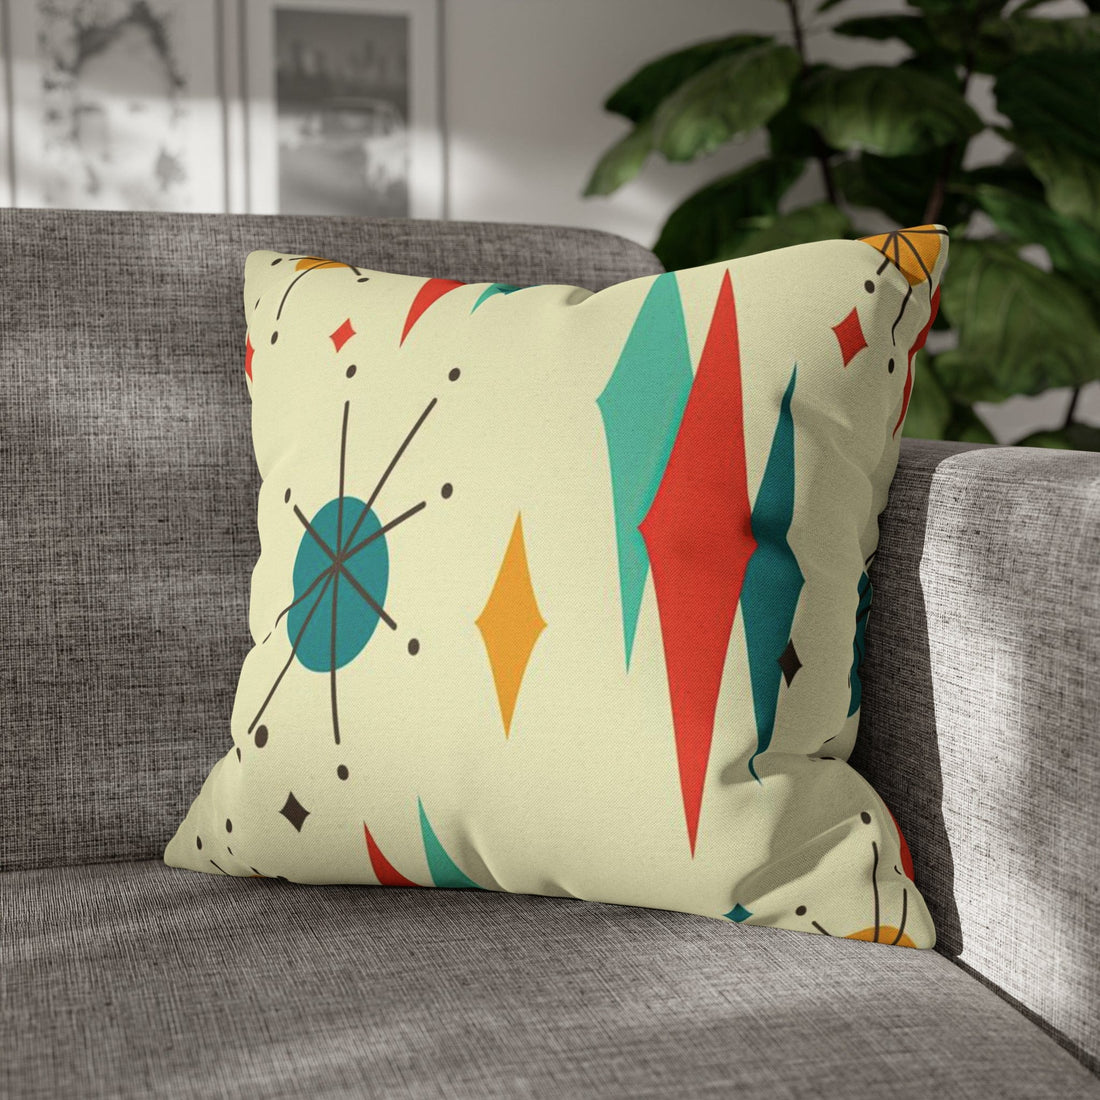 Printify Franciscan Diamond Starburst Throw Pillow Covers in Mid Century Modern Orange, Teal, Cream Hues, Retro 50s MCM Cushion Cover Home Decor 20&quot; × 20&quot; 17942588648012554555